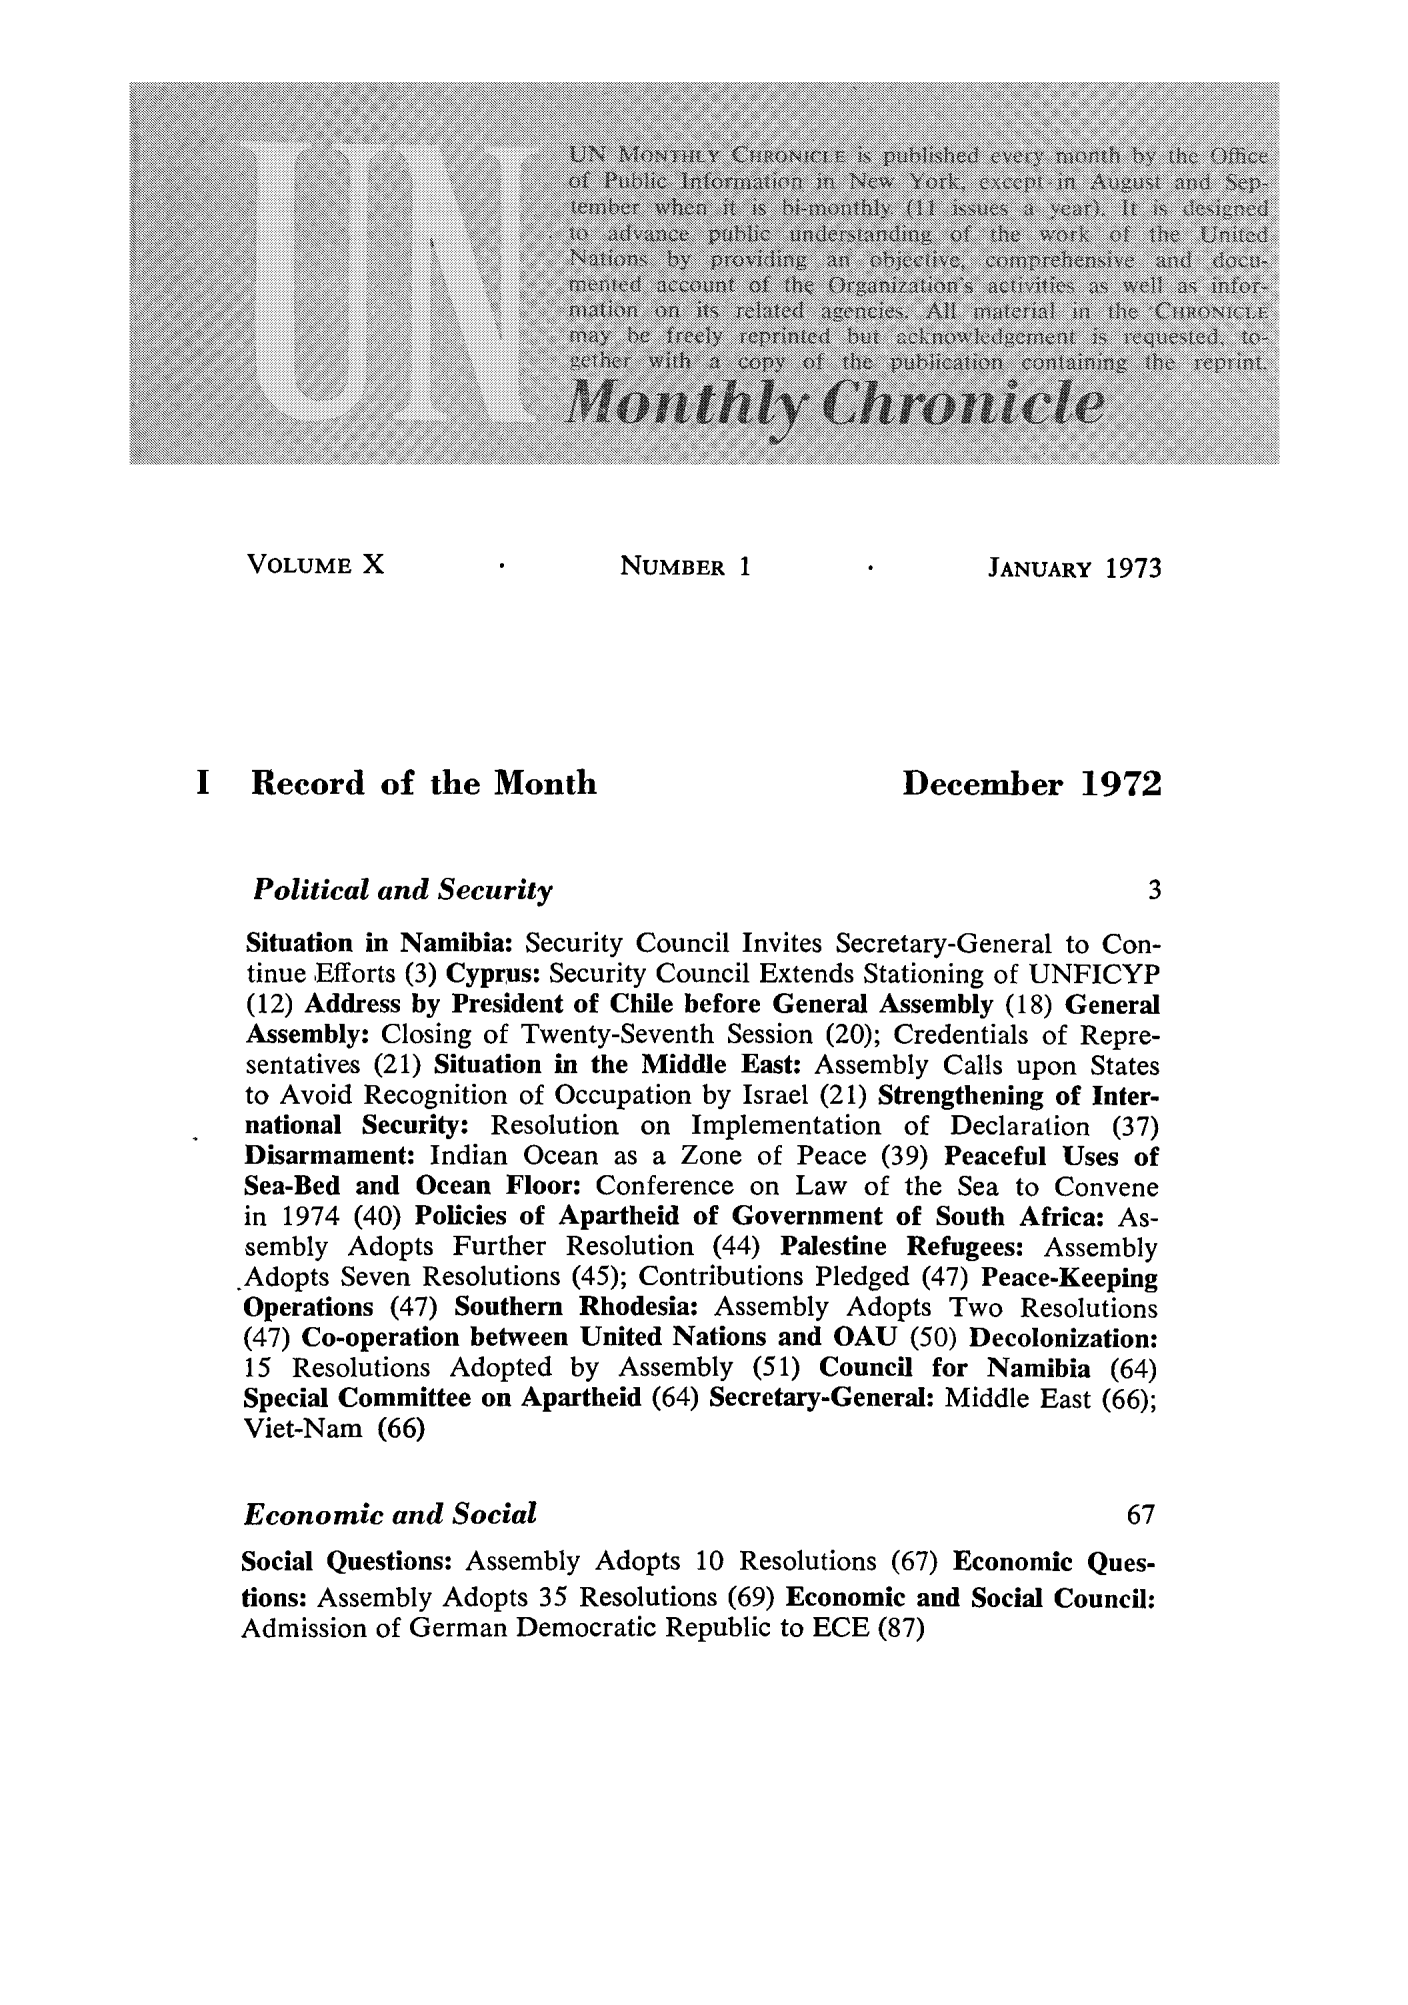 handle is hein.unl/unchron0010 and id is 1 raw text is: VOLUME X                 NUMBER 1                  JANUARY 1973
I   Record of the Month                           December 1972
Political and Security                                         3
Situation in Namibia: Security Council Invites Secretary-General to Con-
tinue ,Efforts (3) Cyprus: Security Council Extends Stationing of UNFICYP
(12) Address by President of Chile before General Assembly (18) General
Assembly: Closing of Twenty-Seventh Session (20); Credentials of Repre-
sentatives (21) Situation in the Middle East: Assembly Calls upon States
to Avoid Recognition of Occupation by Israel (21) Strengthening of Inter-
national Security: Resolution on Implementation of Declaration (37)
Disarmament: Indian Ocean as a Zone of Peace (39) Peaceful Uses of
Sea-Bed and Ocean Floor: Conference on Law of the Sea to Convene
in 1974 (40) Policies of Apartheid of Government of South Africa: As-
sembly Adopts Further Resolution (44) Palestine Refugees: Assembly
.Adopts Seven Resolutions (45); Contributions Pledged (47) Peace-Keeping
Operations (47) Southern Rhodesia: Assembly Adopts Two Resolutions
(47) Co-operation between United Nations and OAU (50) Decolonization:
15 Resolutions Adopted by Assembly (51) Council for Namibia (64)
Special Committee on Apartheid (64) Secretary-General: Middle East (66);
Viet-Nam (66)
Economic and Social                                           67
Social Questions: Assembly Adopts 10 Resolutions (67) Economic Ques-
tions: Assembly Adopts 35 Resolutions (69) Economic and Social Council:
Admission of German Democratic Republic to ECE (87)


